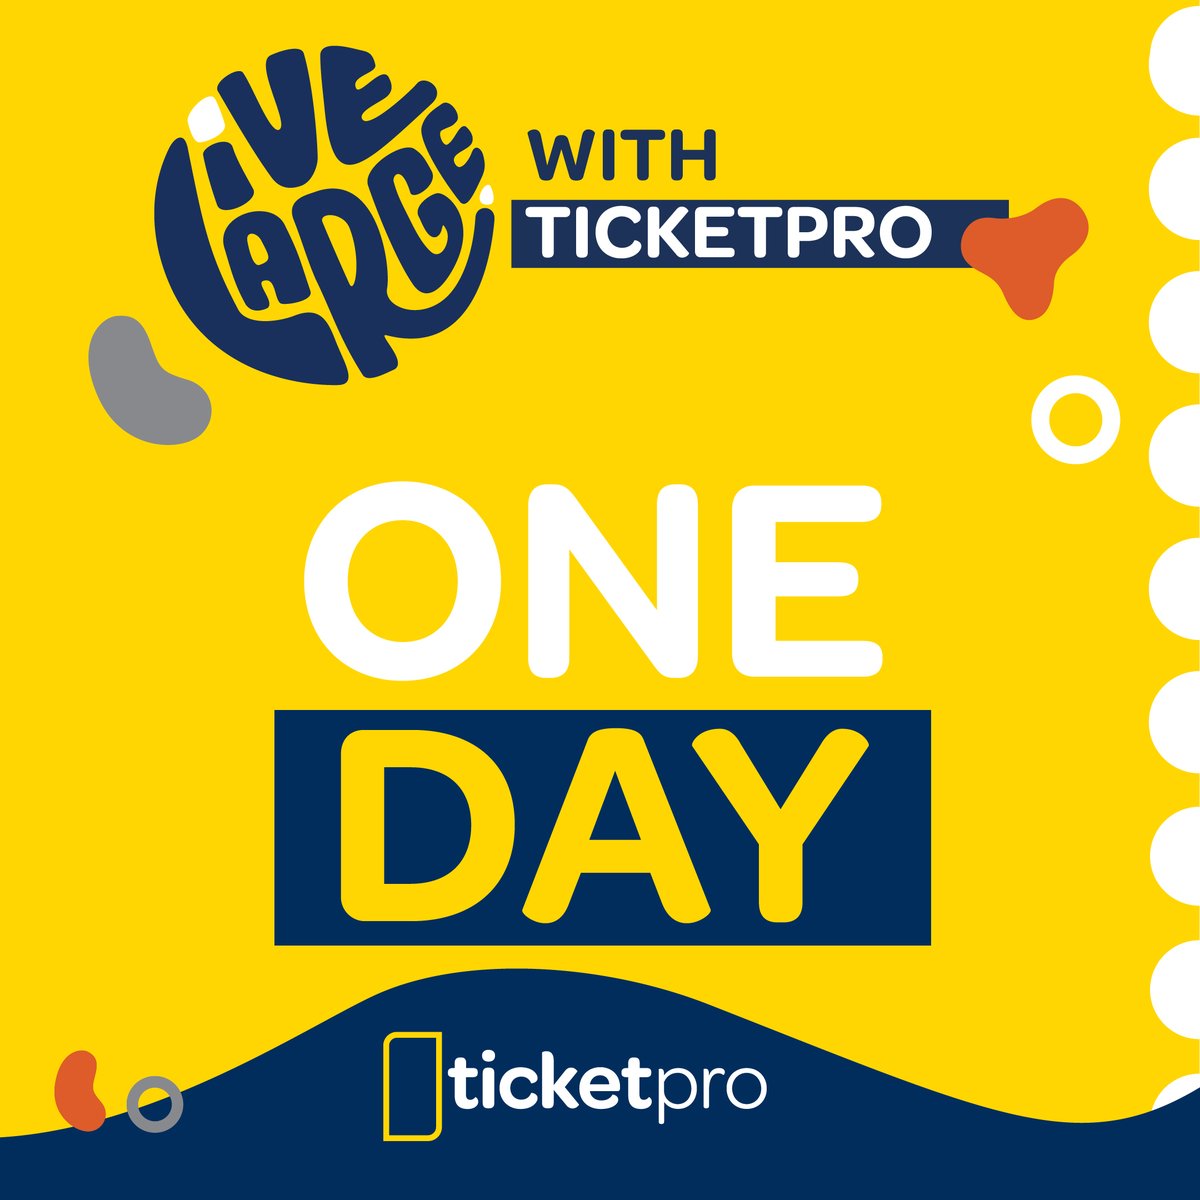 Just 24 hours to go. Its big, epic, SUPERSIZED and it’s almost here🥳 Can you guess what it is? Stay tuned. #TicketProLiveLarge